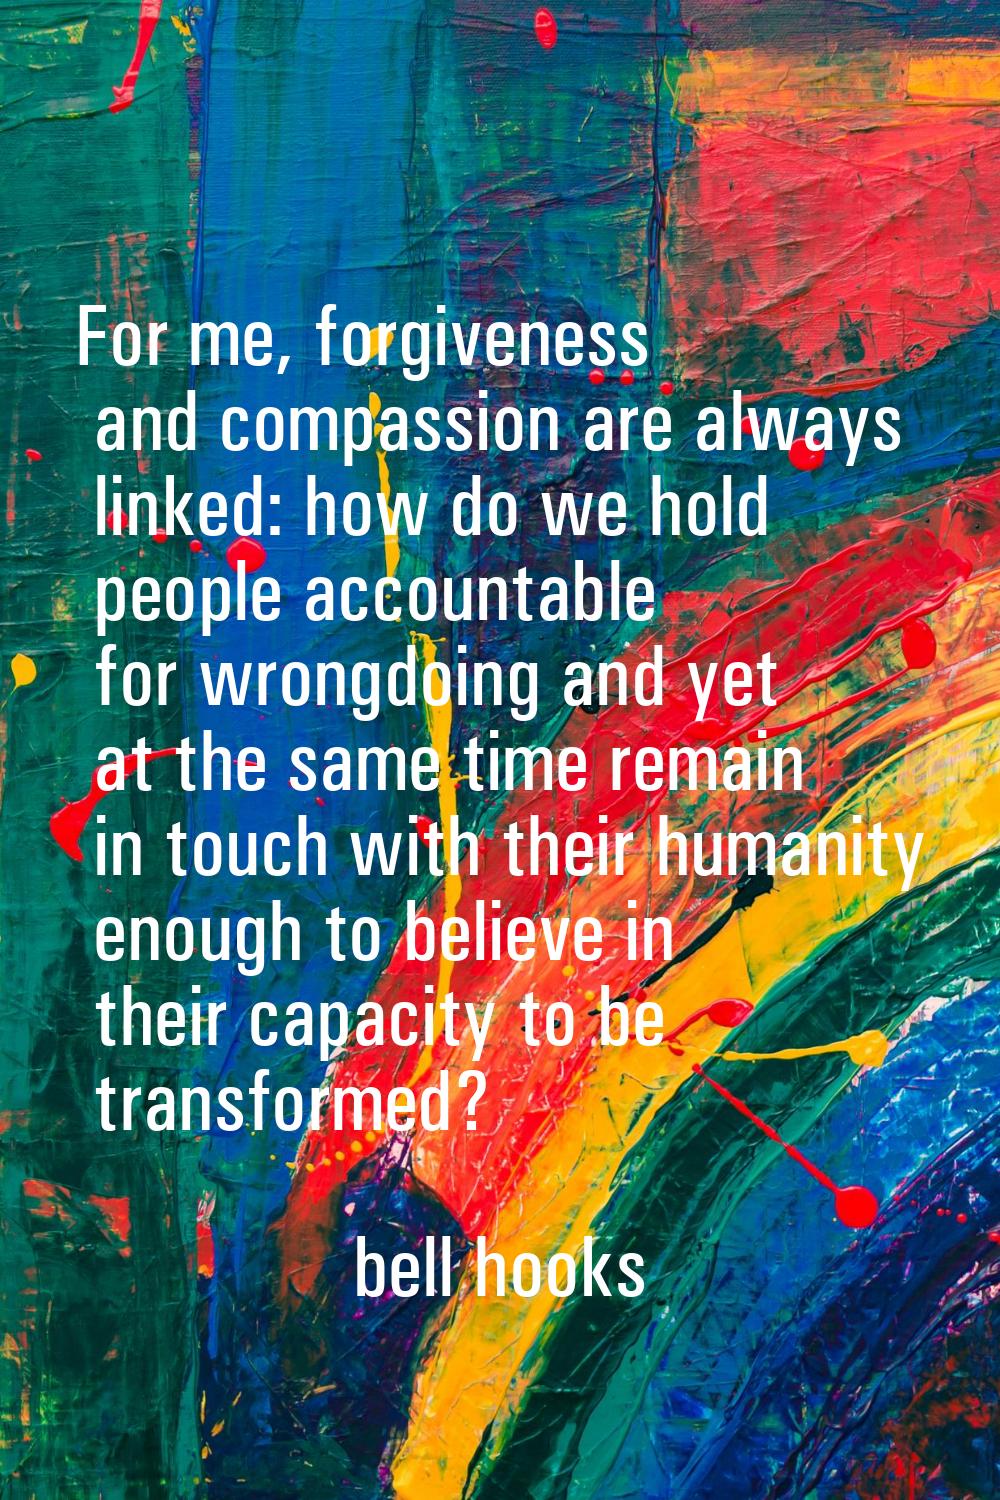 For me, forgiveness and compassion are always linked: how do we hold people accountable for wrongdo